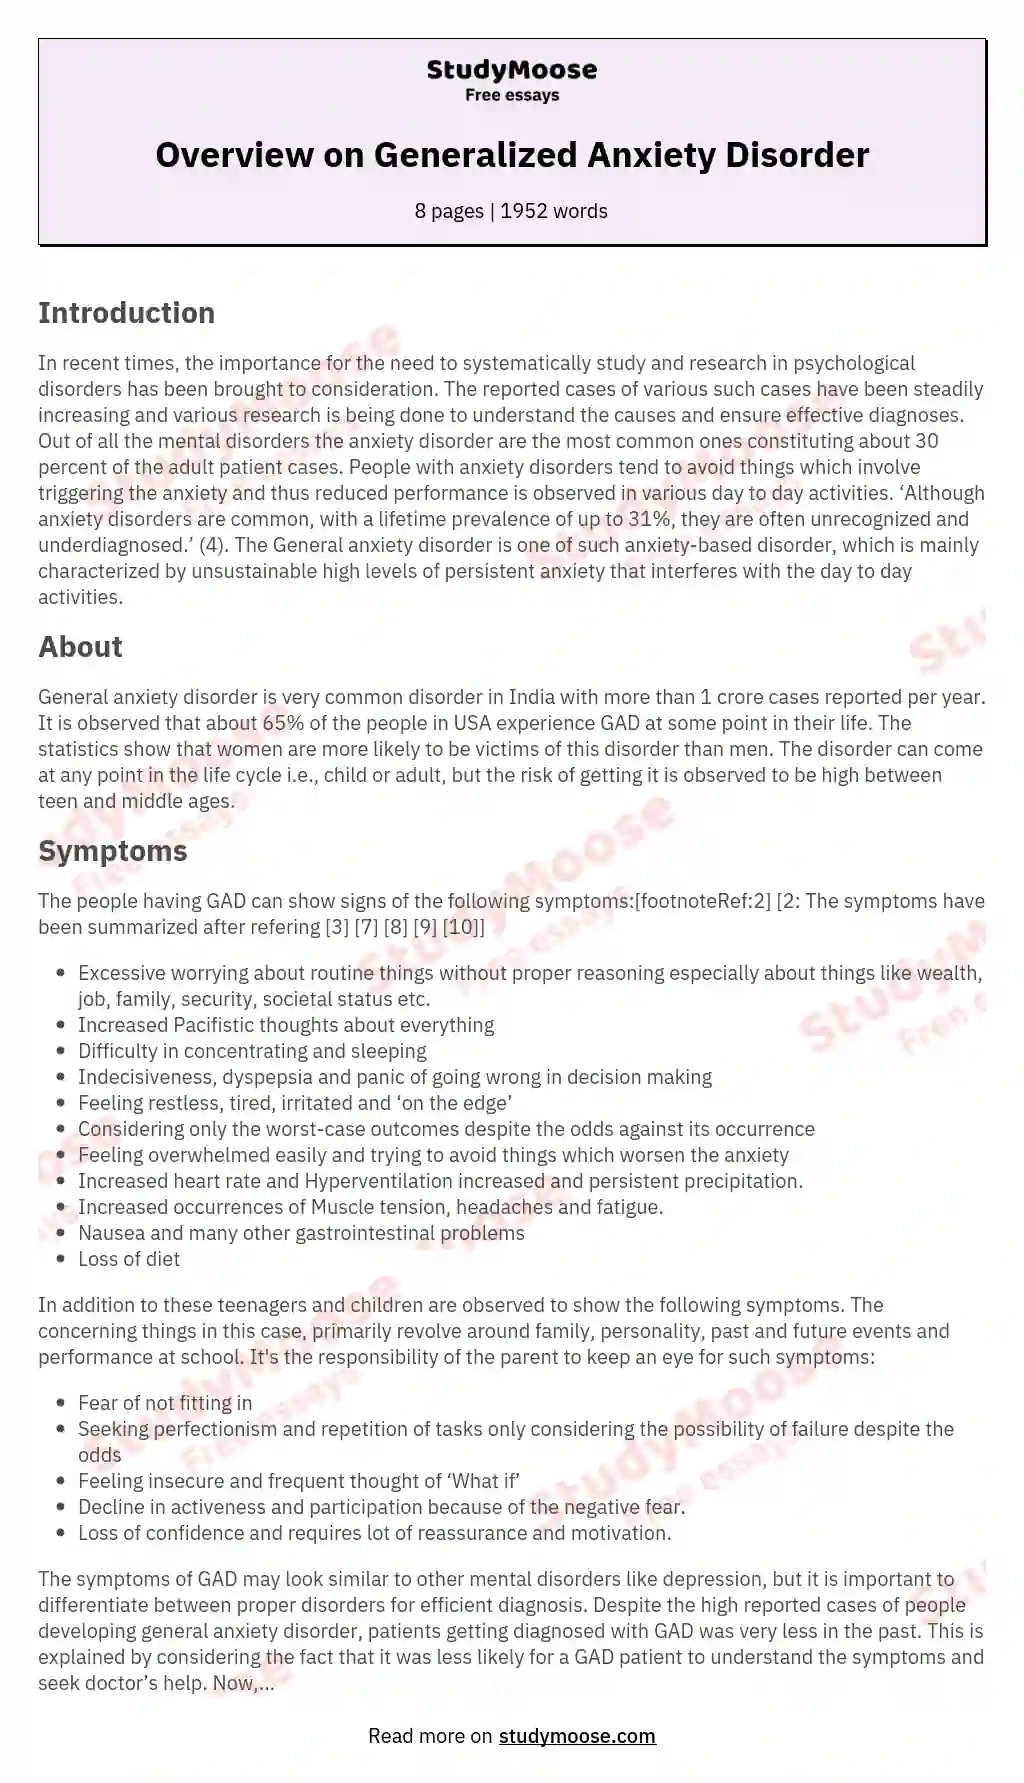 Overview on Generalized Anxiety Disorder essay